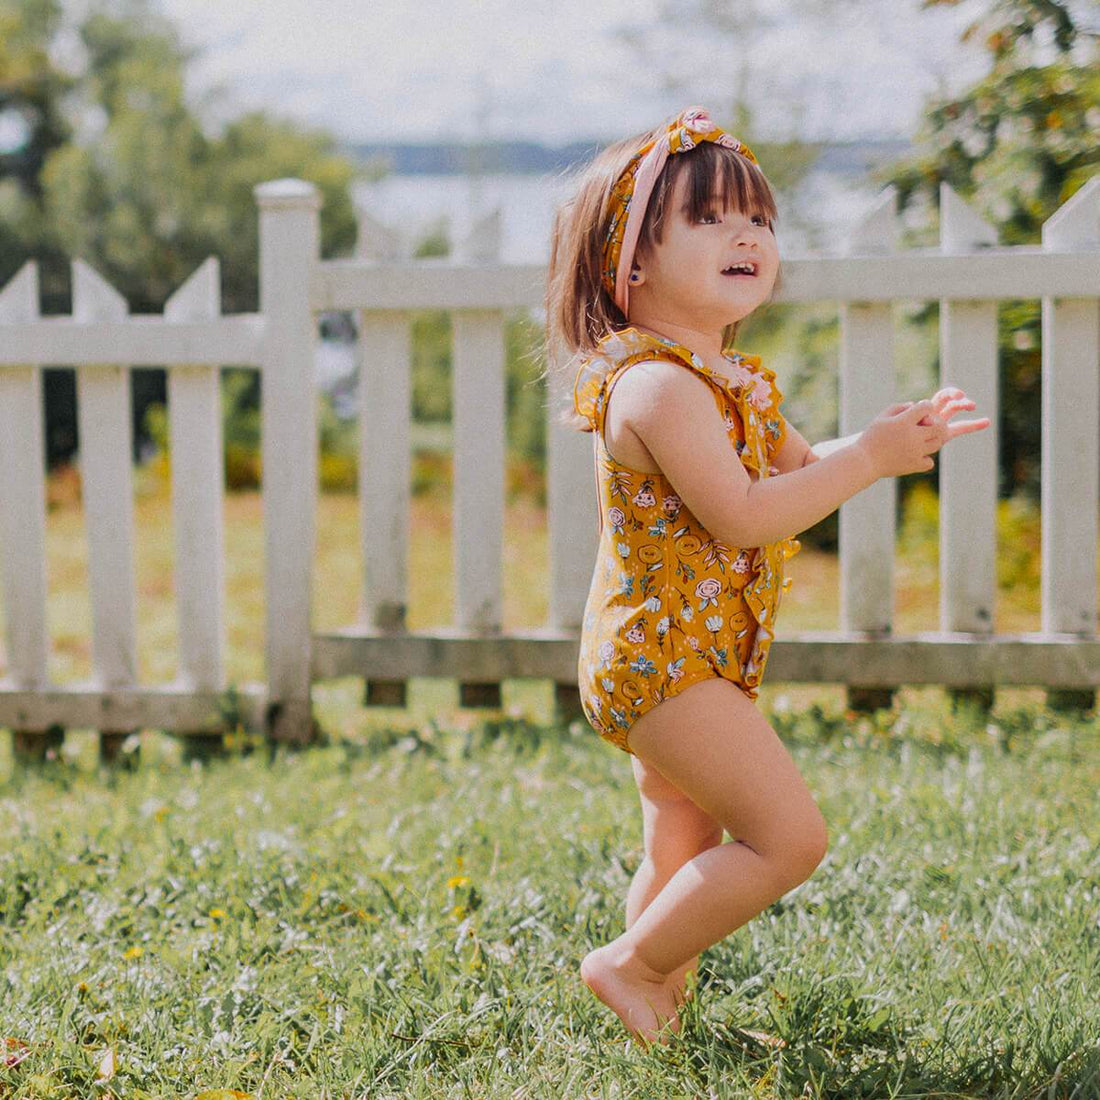 YELLOW FLORAL ONE-PIECE SWIMSUIT, BABY GIRL